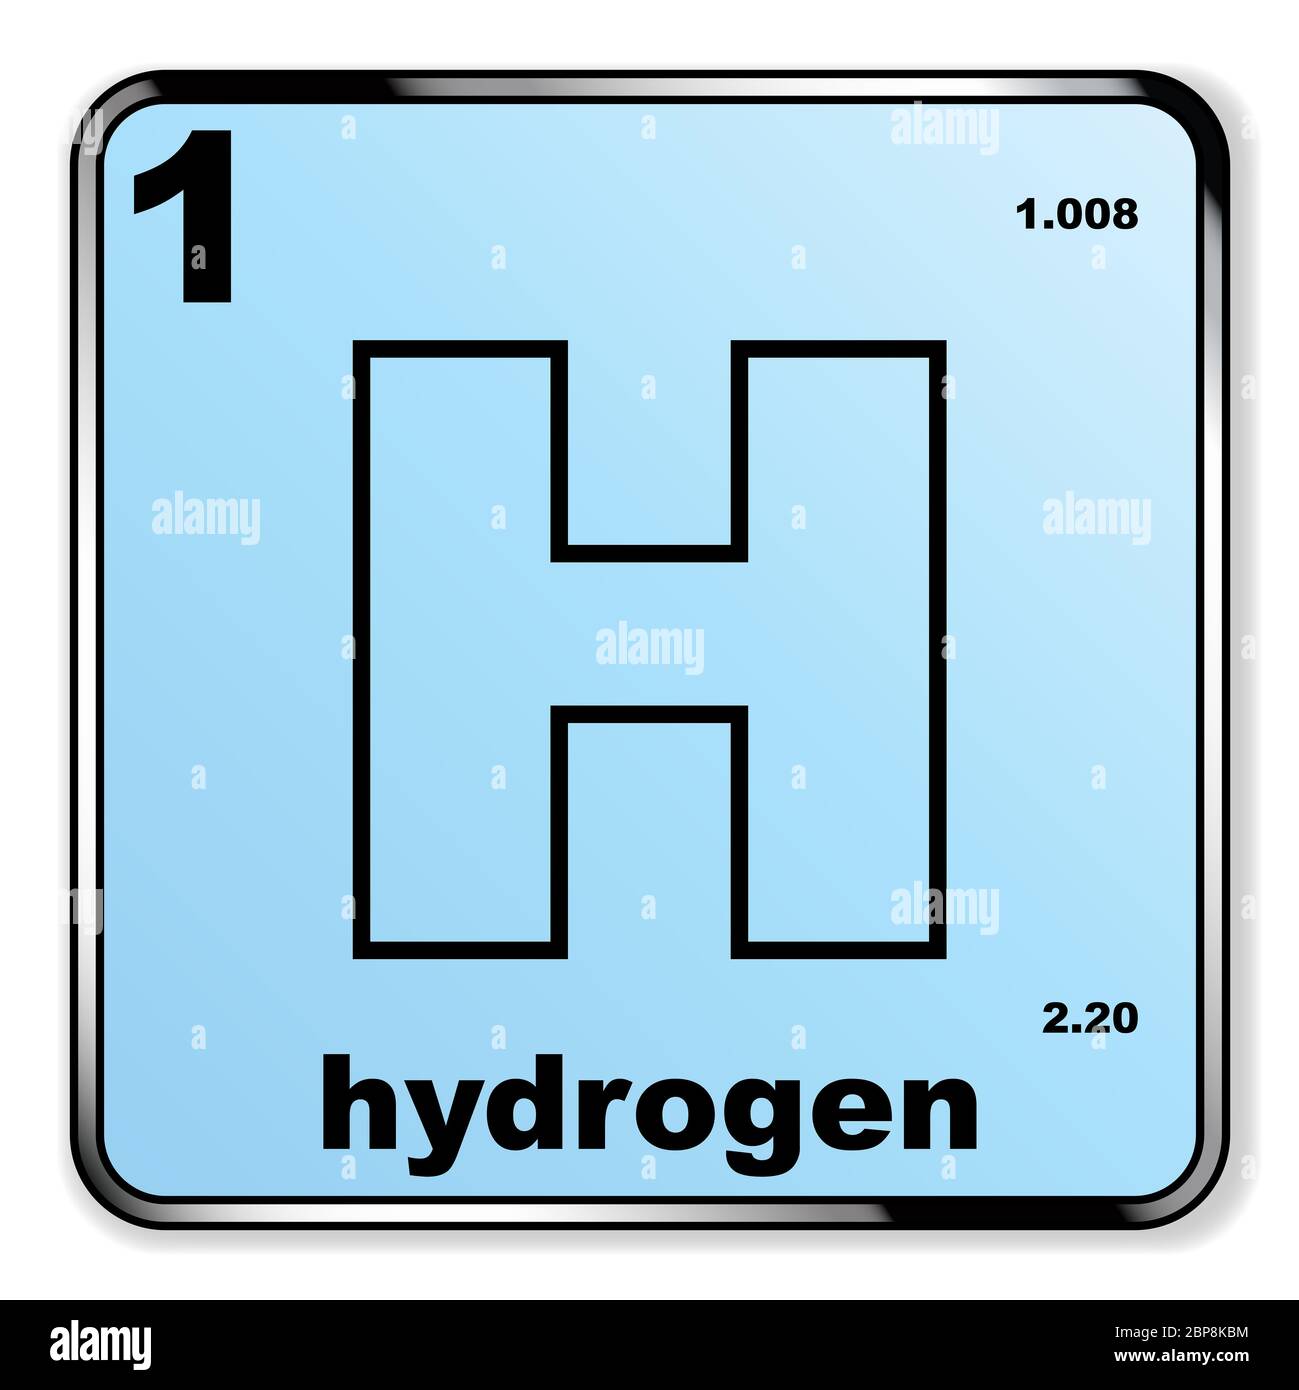 Hydrogen taken from the periodic table of elements over a white background  Stock Photo - Alamy